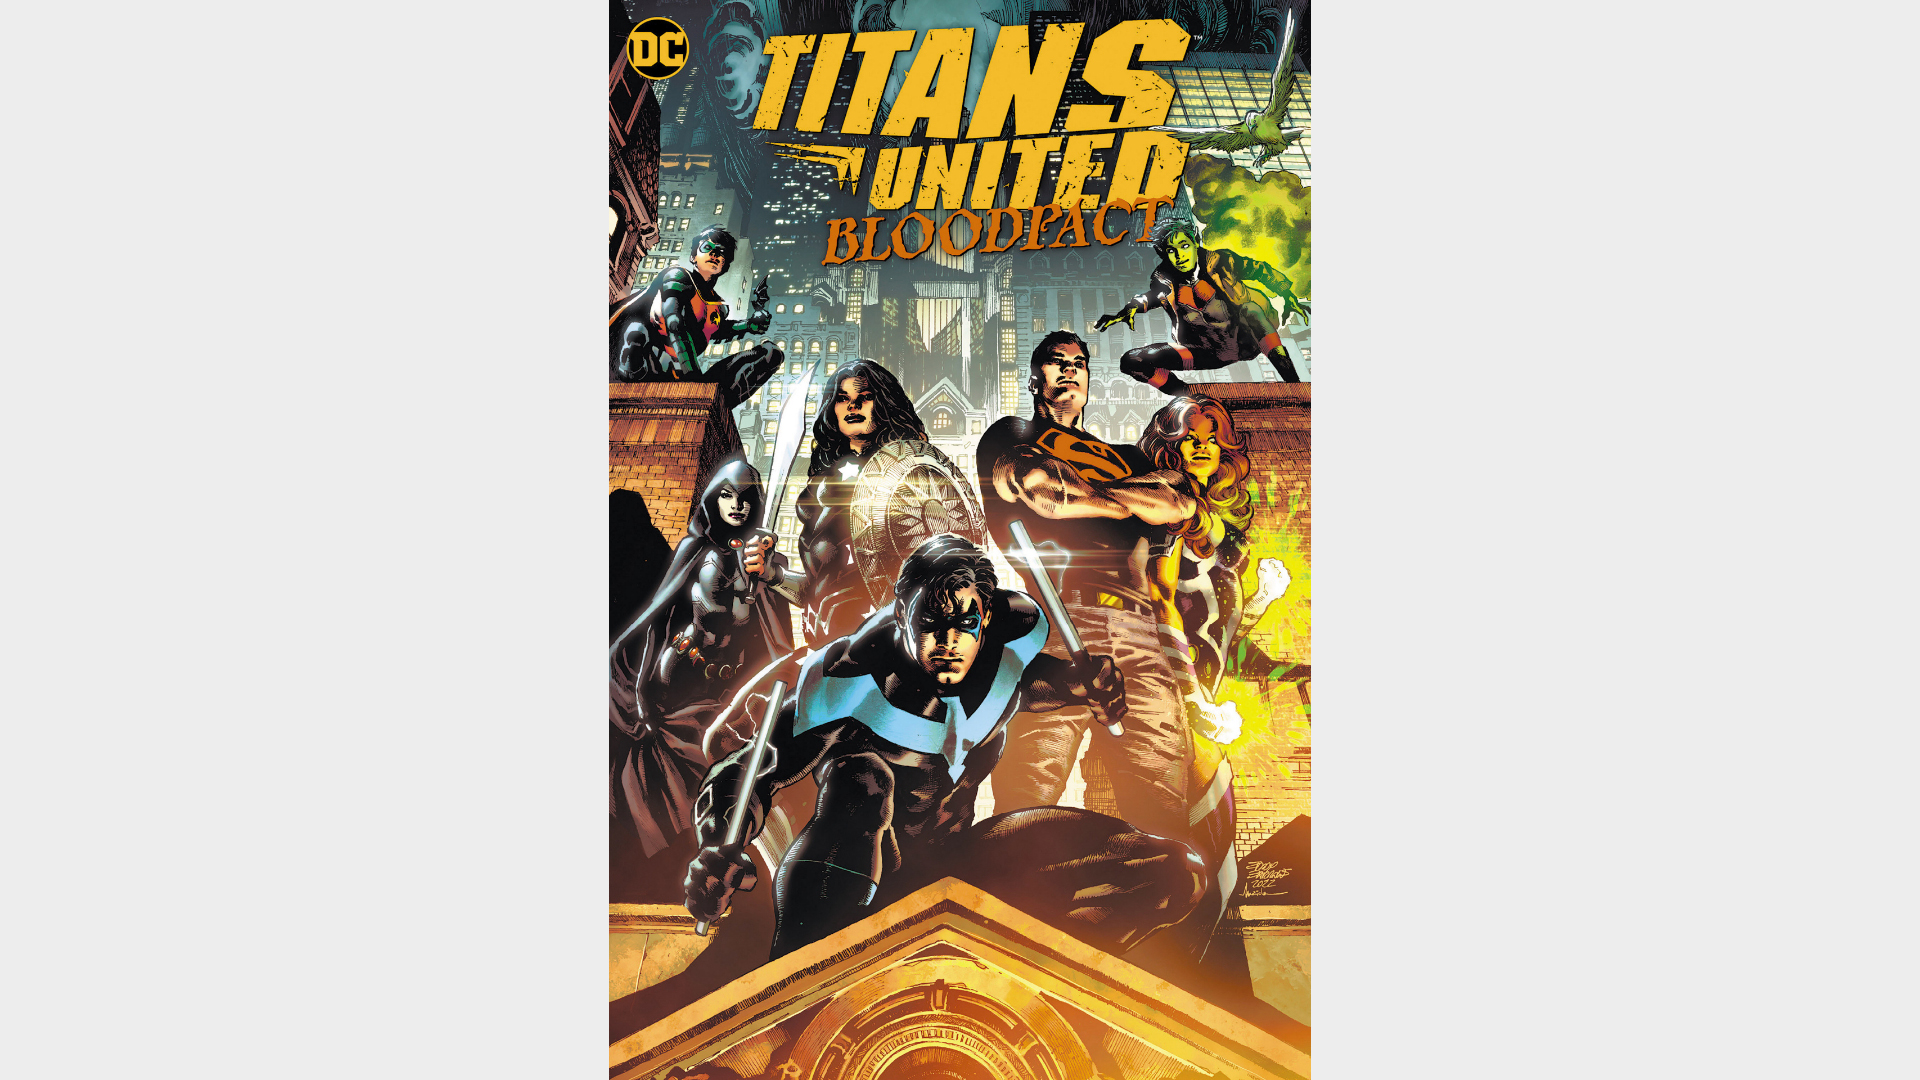 TITANS UNITED: BLOODPACT